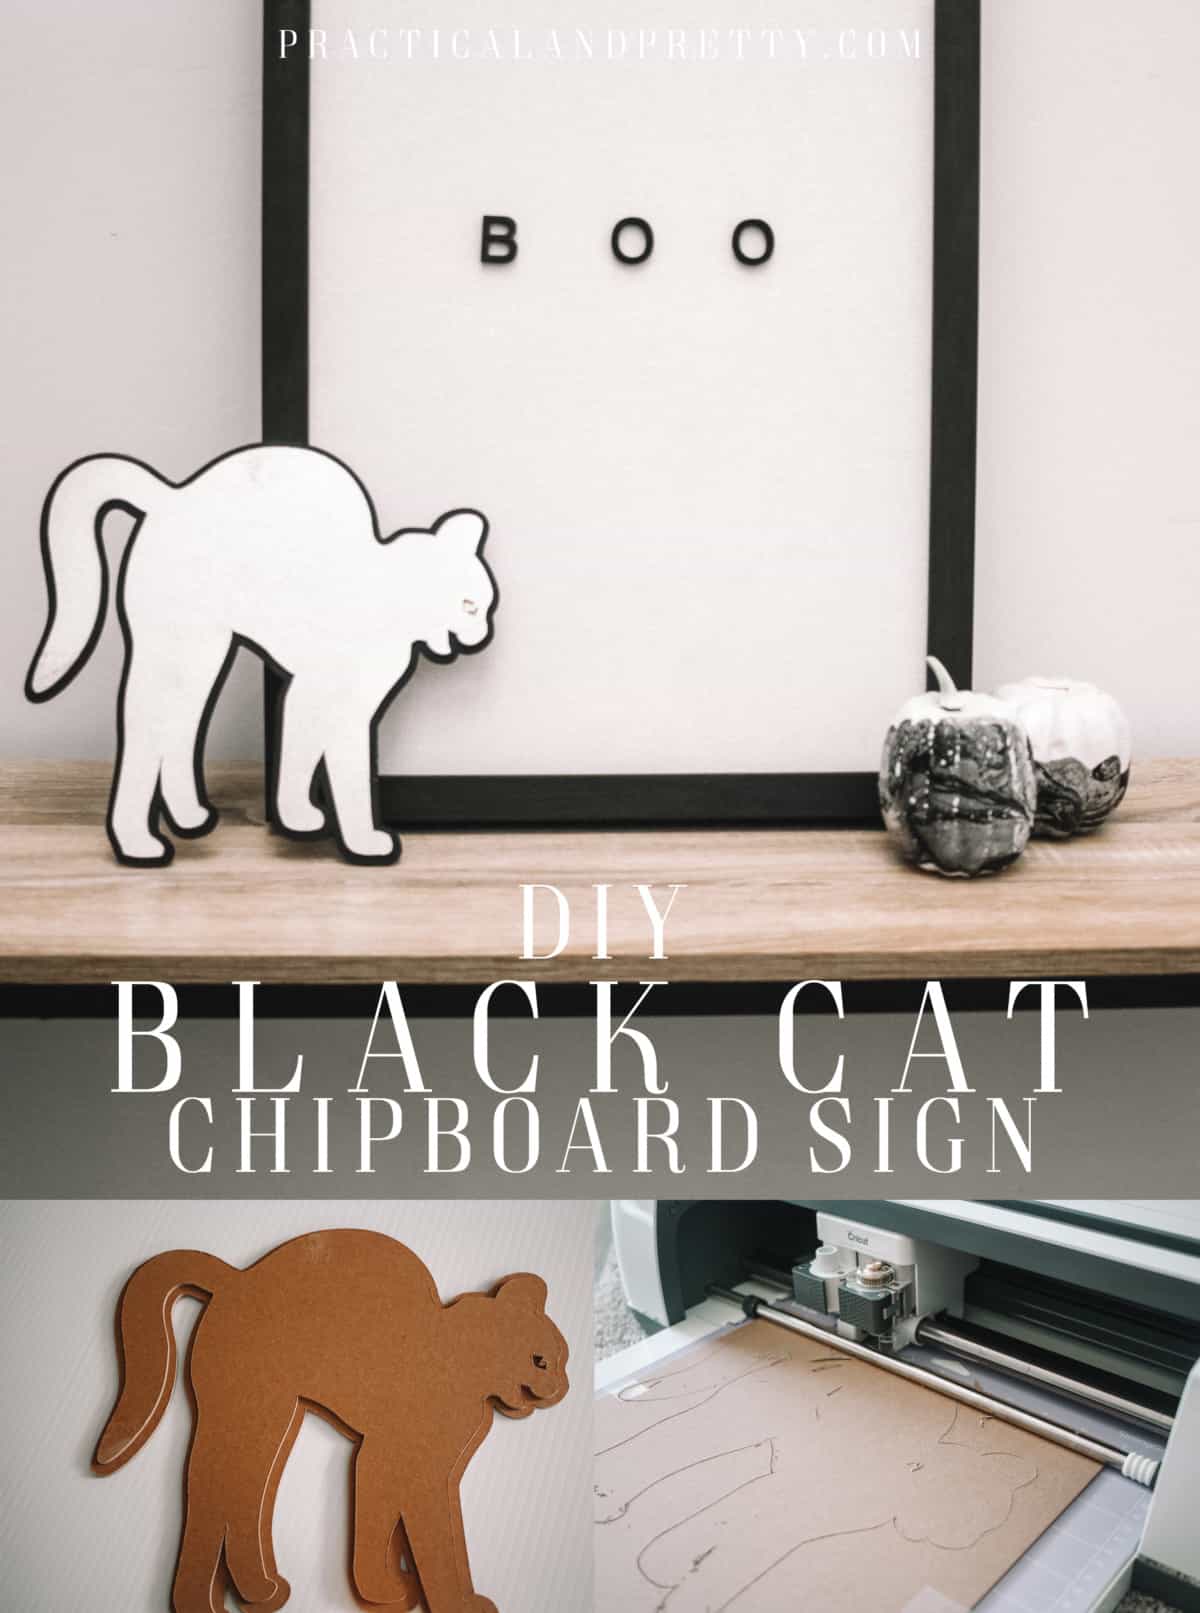 You can DIY your own halloween decor with this simple tutorial for a black cat chipboard sign!